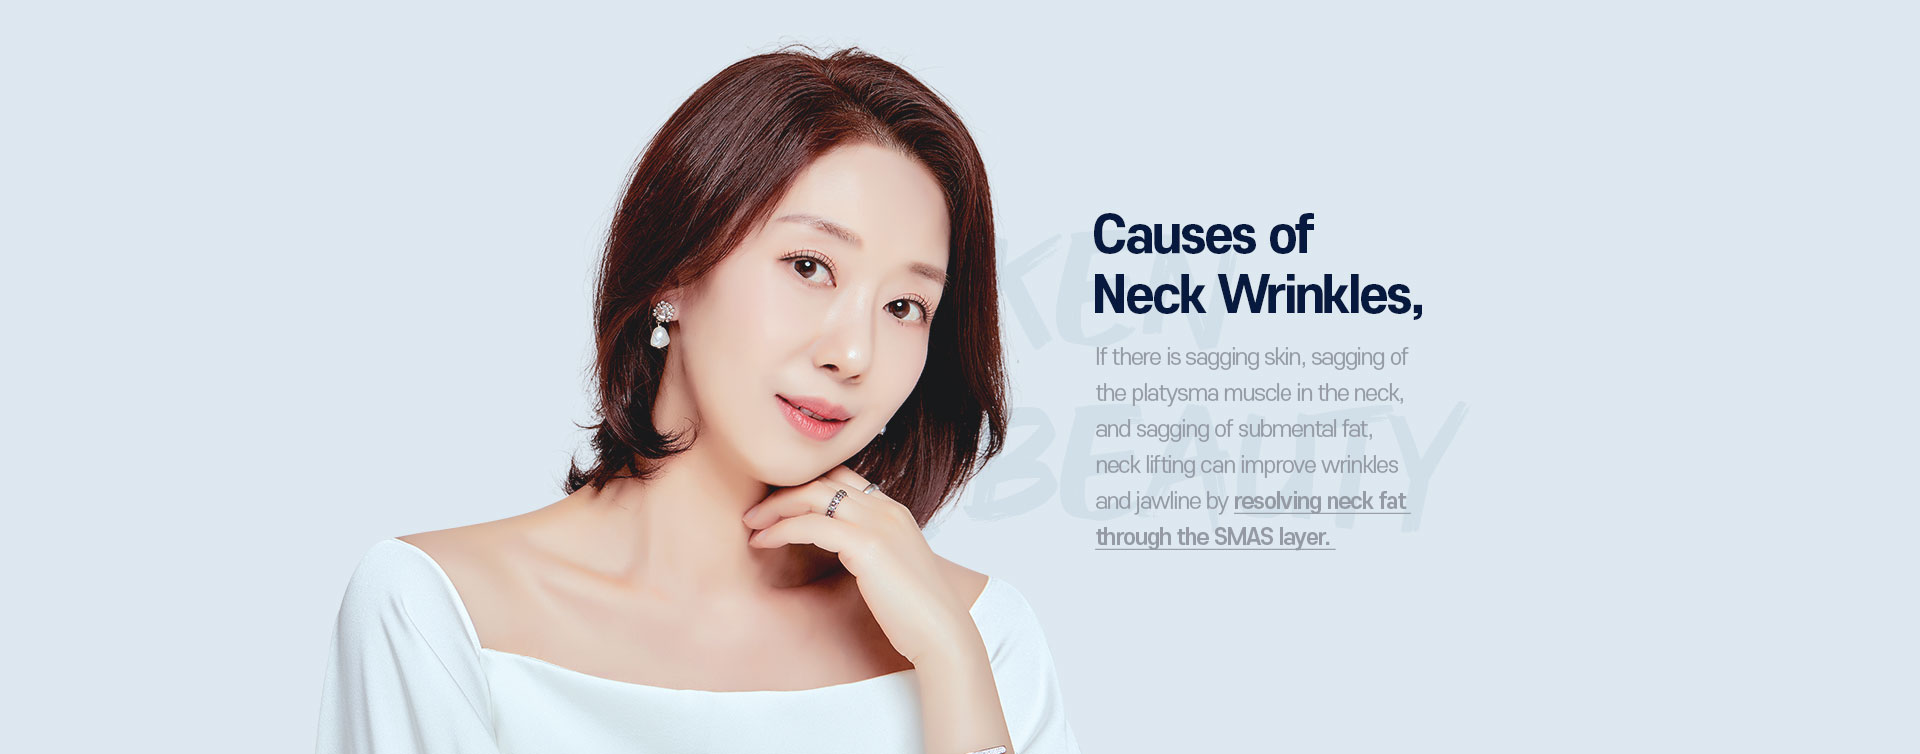 Causes of Neck Wrinkles